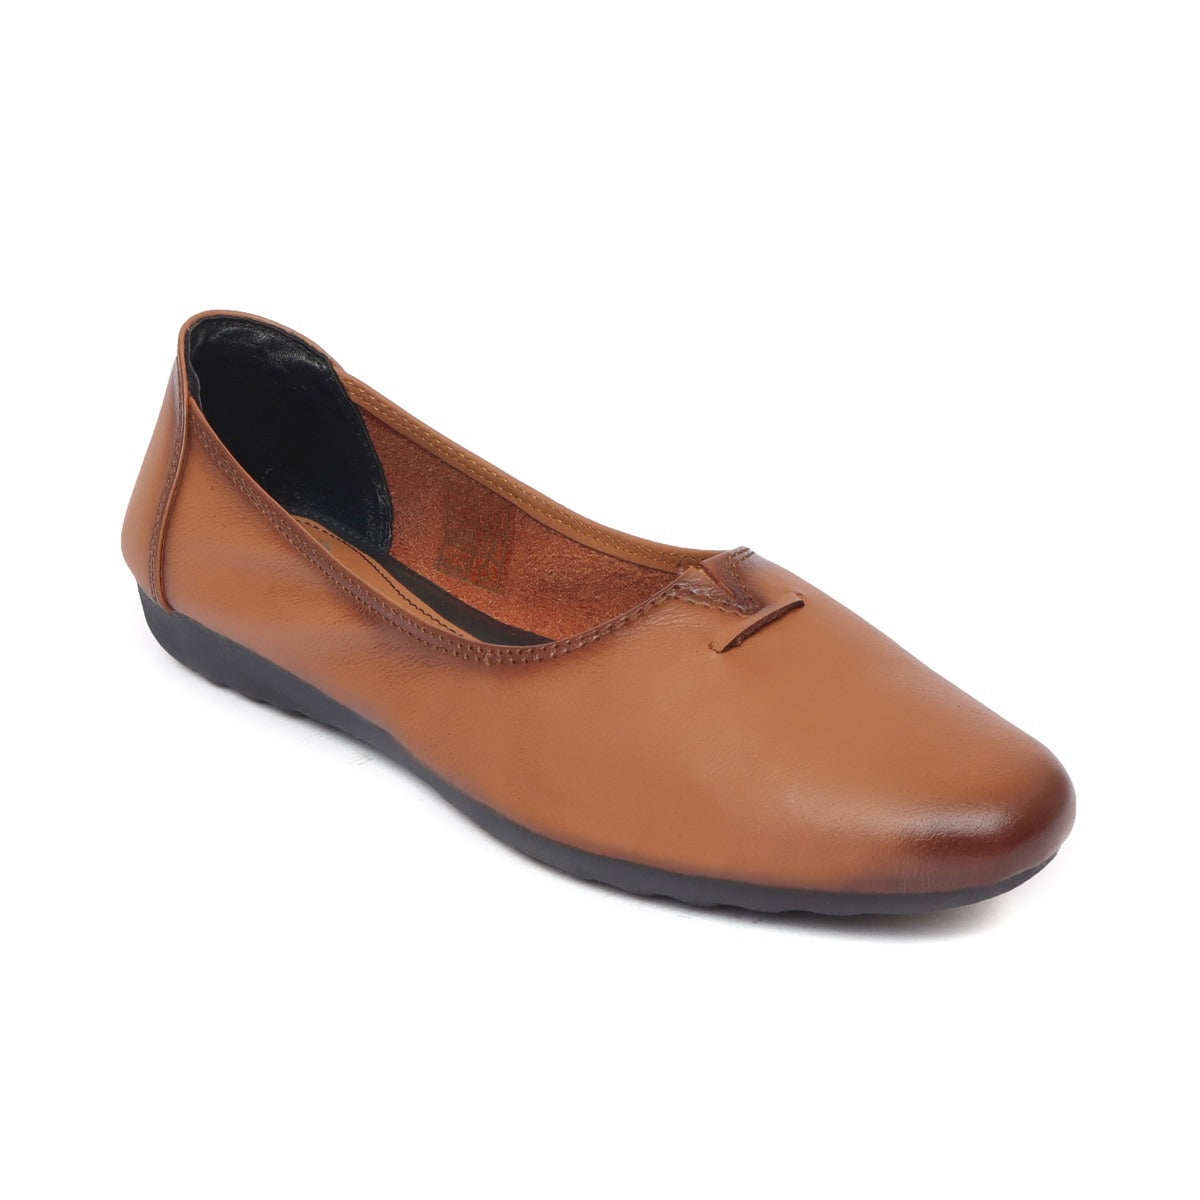 Zoom Shoes™ Genuine Leather Bellies for Women NV-111